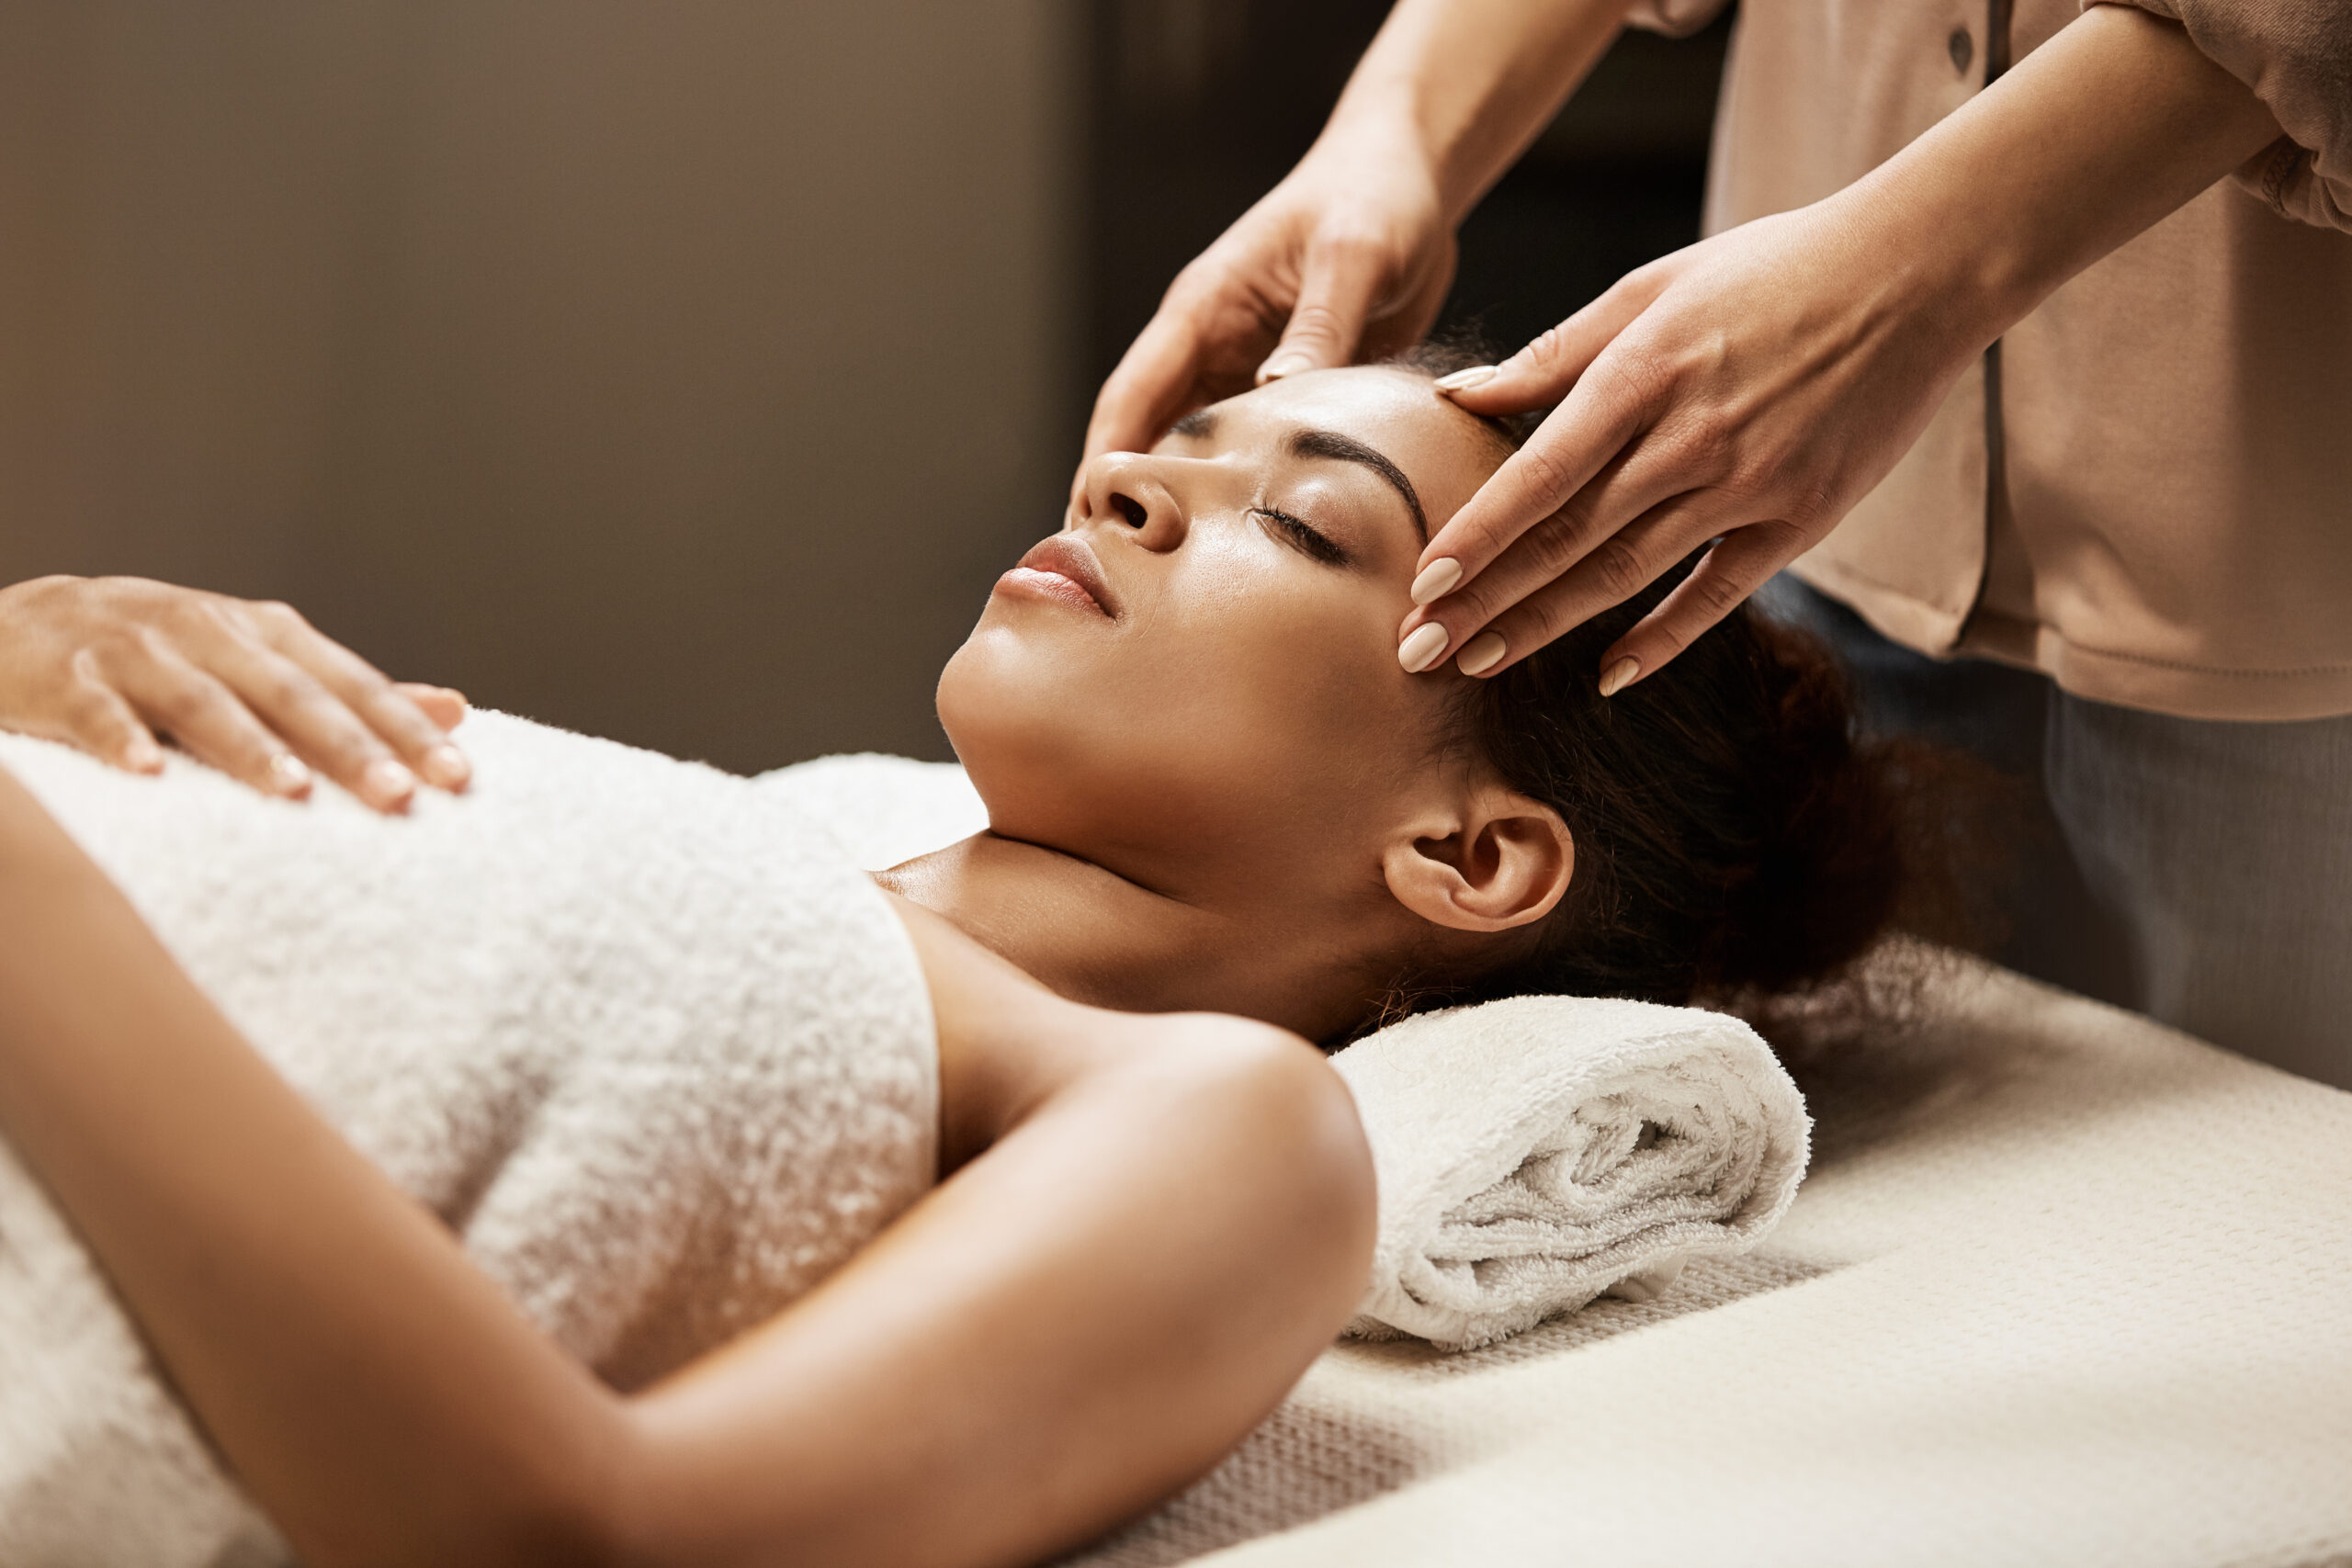 Massage Innovation: Why the Spa Industry Is Booming